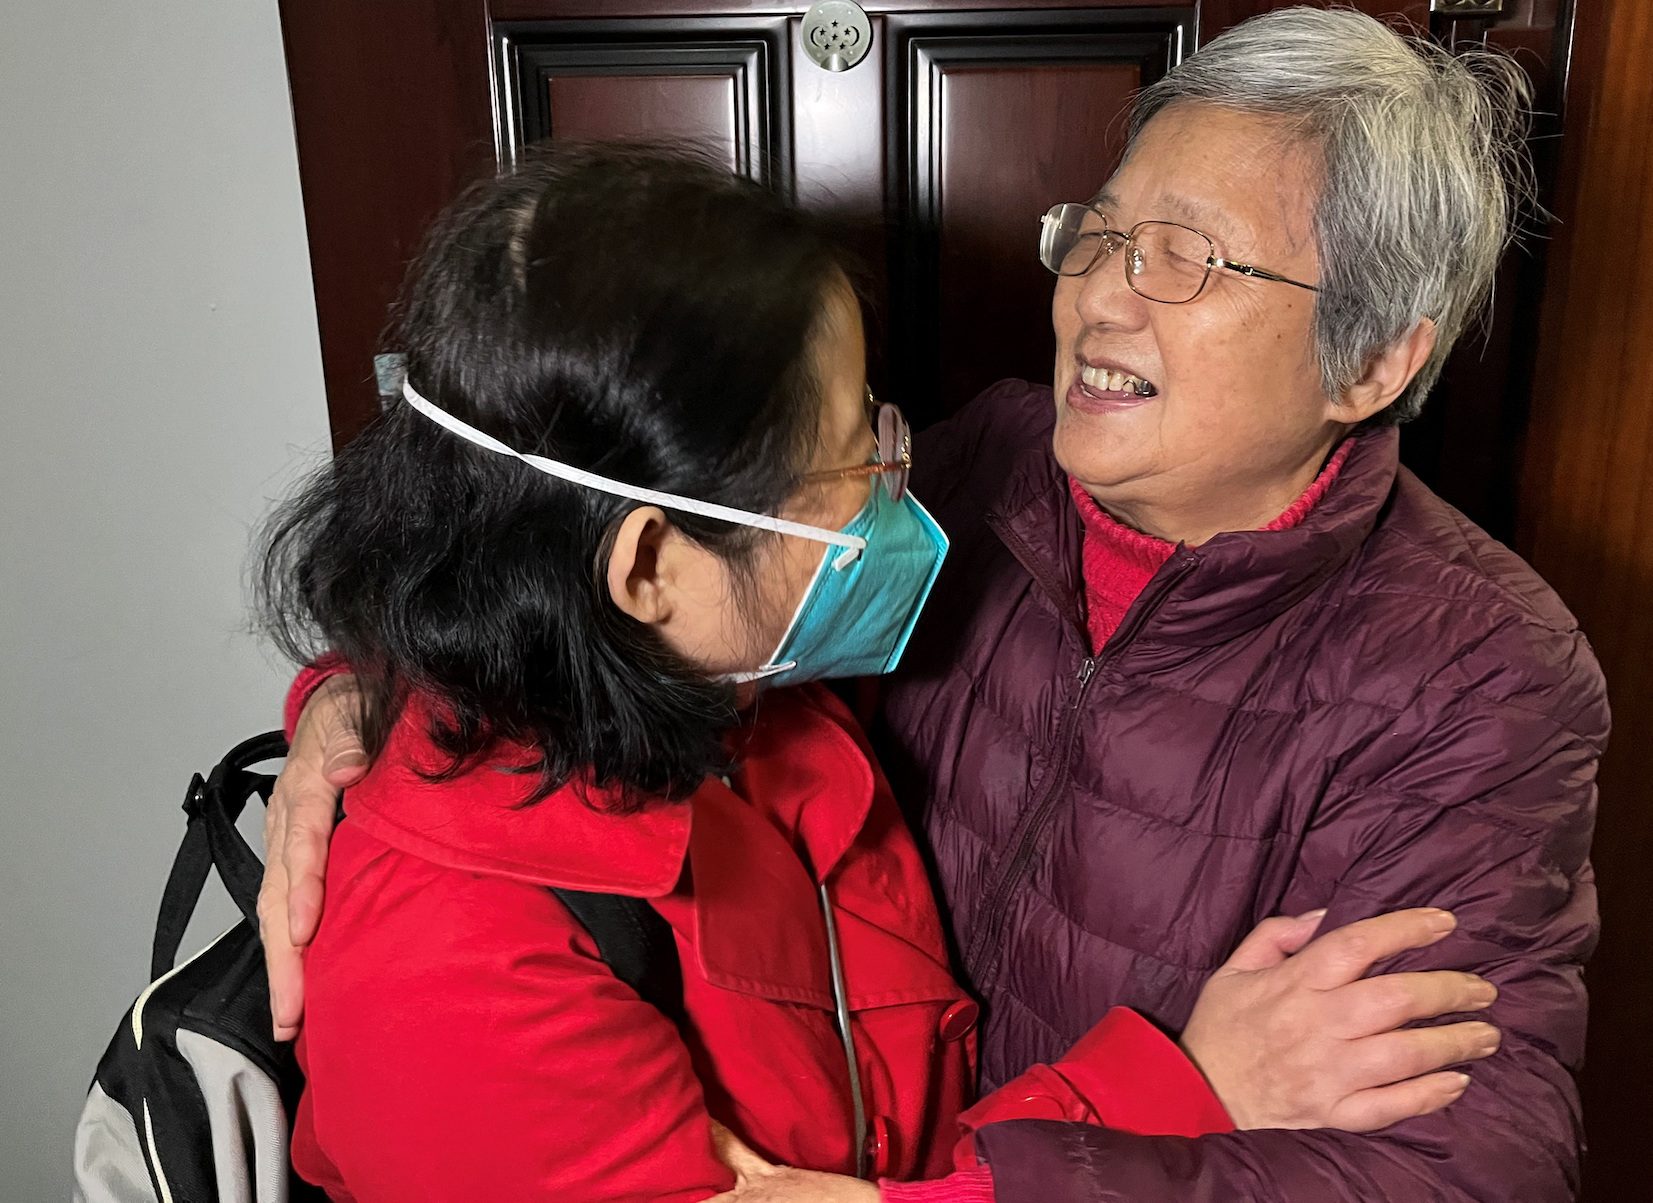 Family members reunite in China after 3-year COVID-19 separation